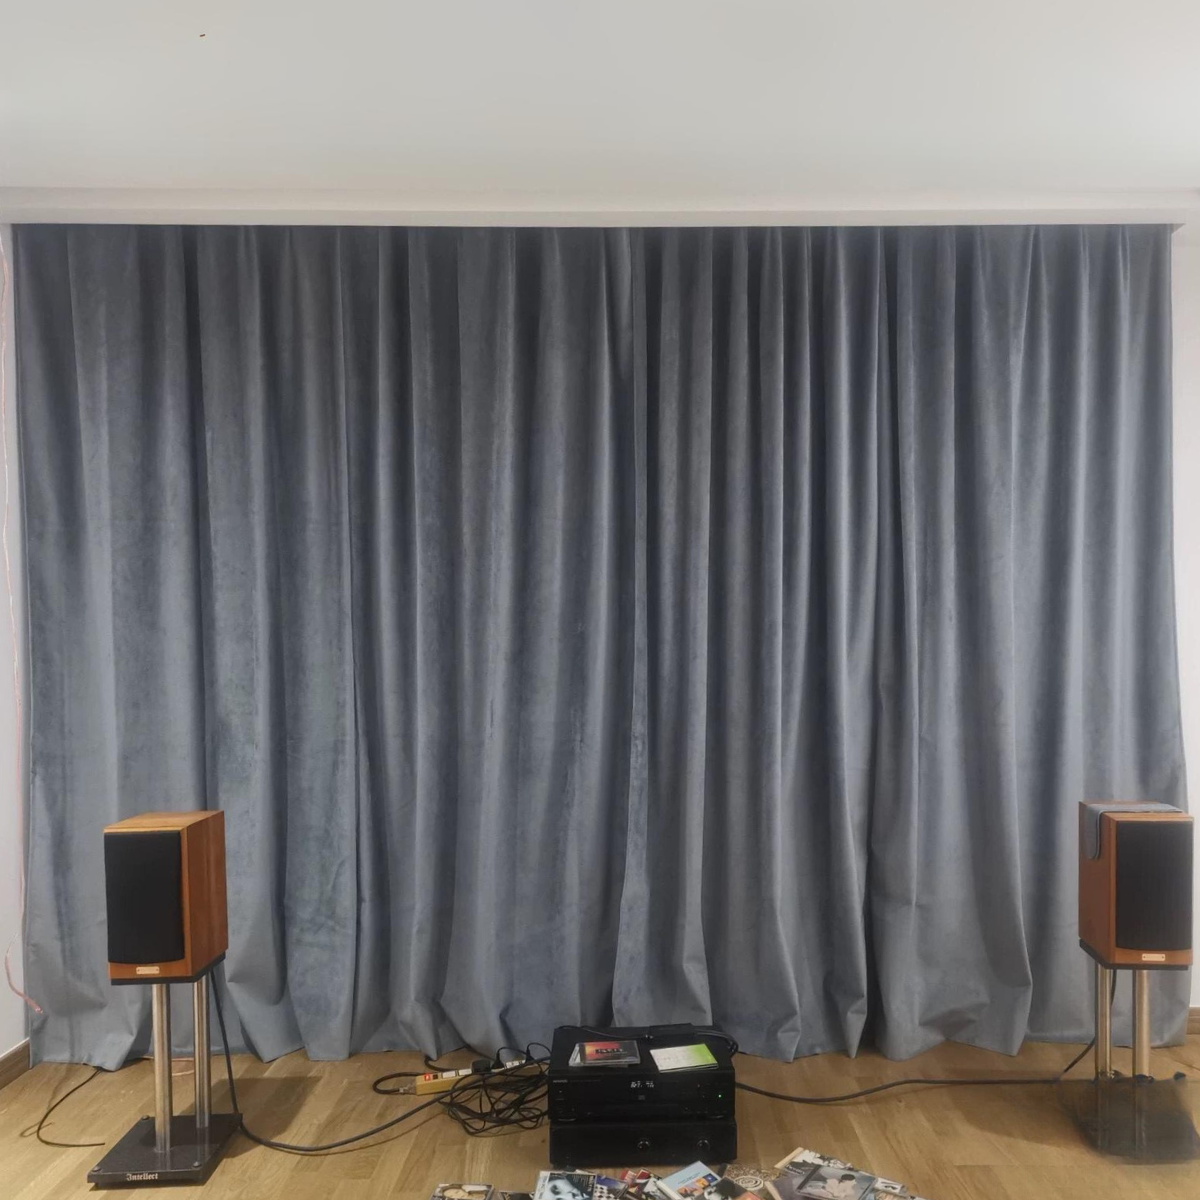 Ena Soundproof Curtain [SGS Certified] Acoustic sound dampening absorbing Drapes